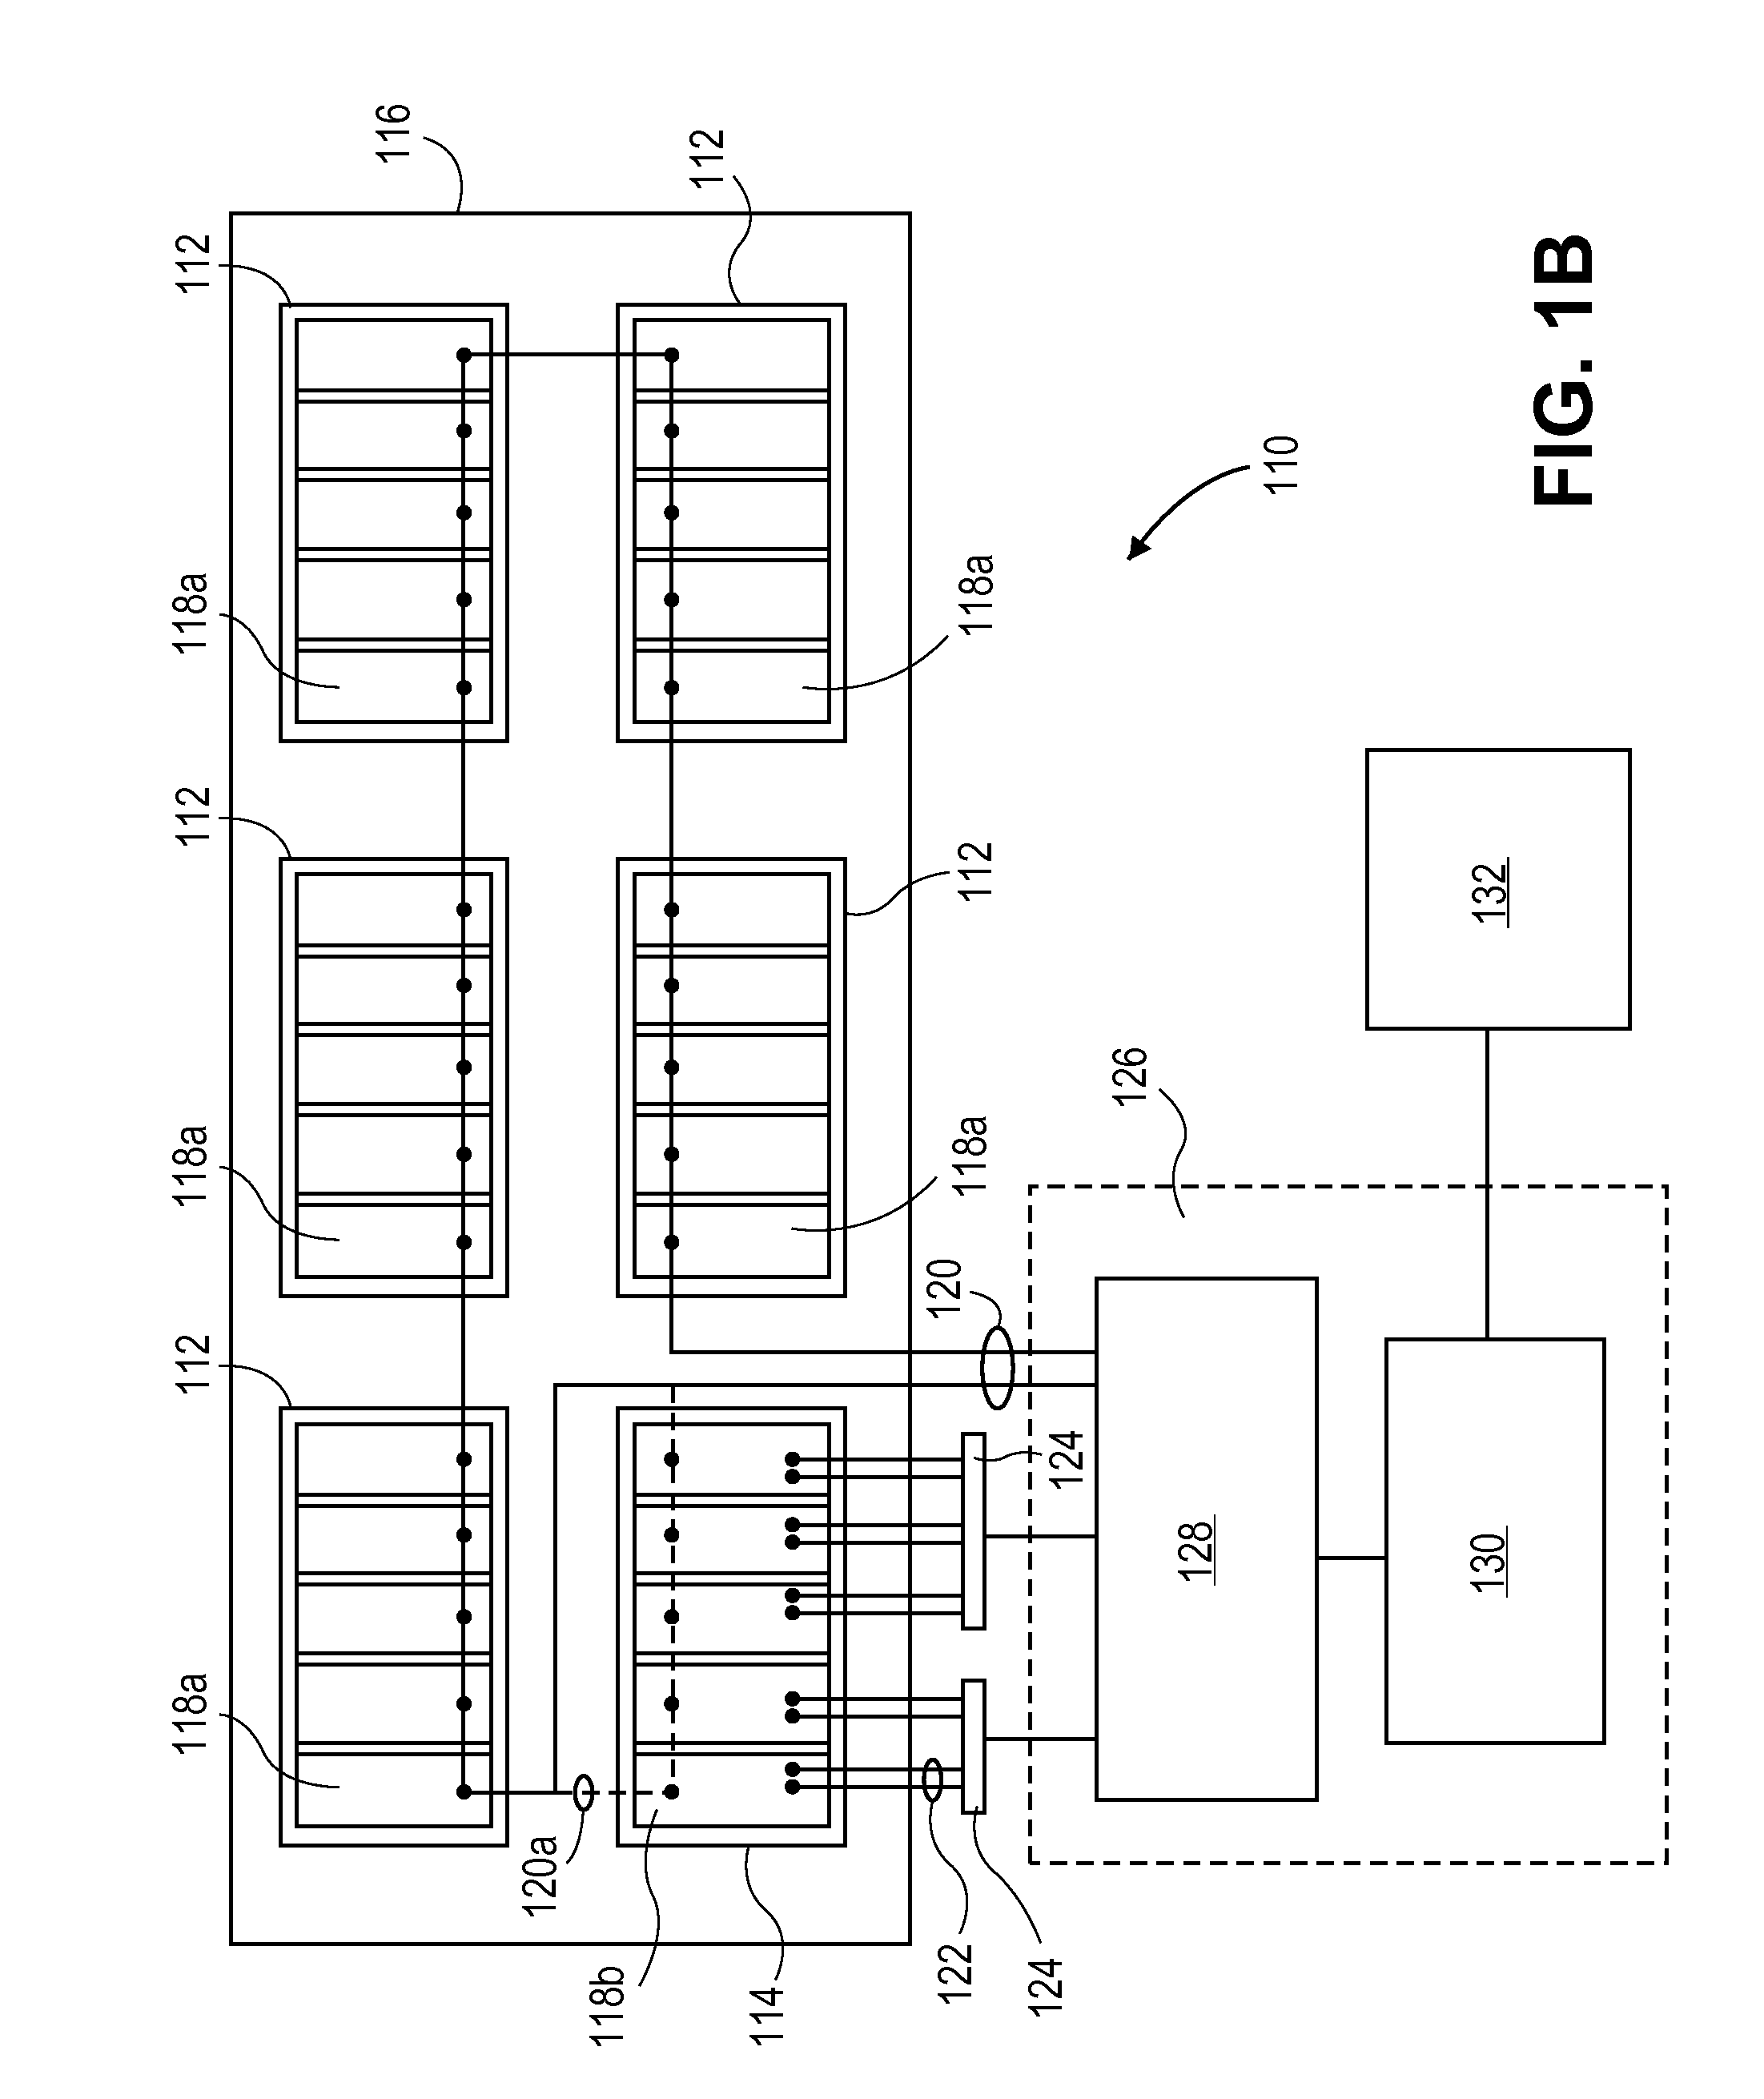 Photovoltaic device for measuring irradiance and temperature